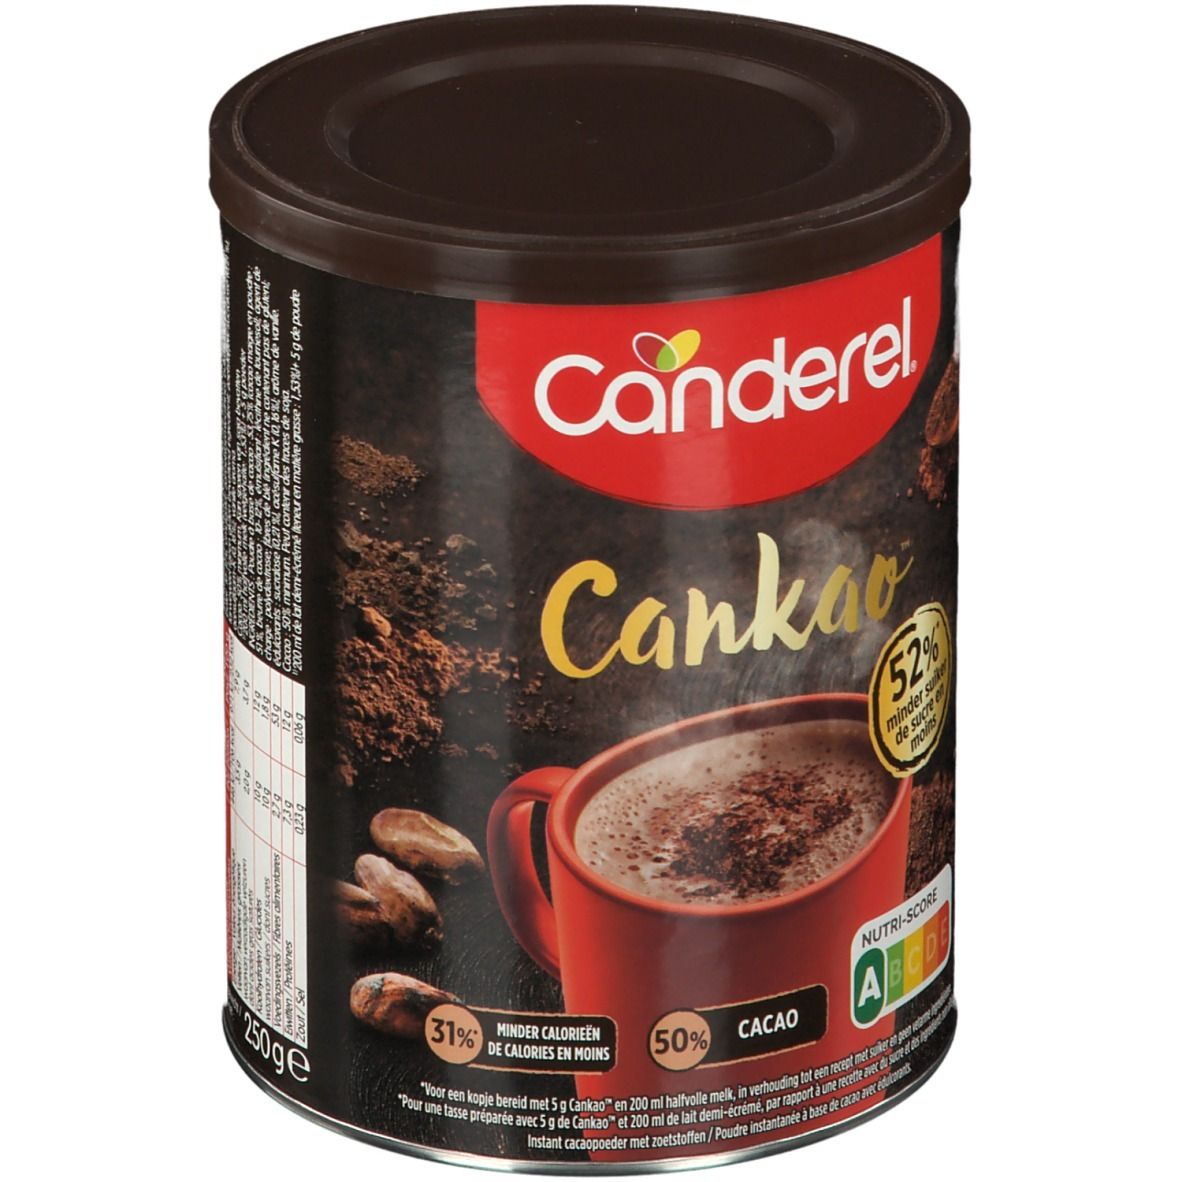 Canderel® Cankao™